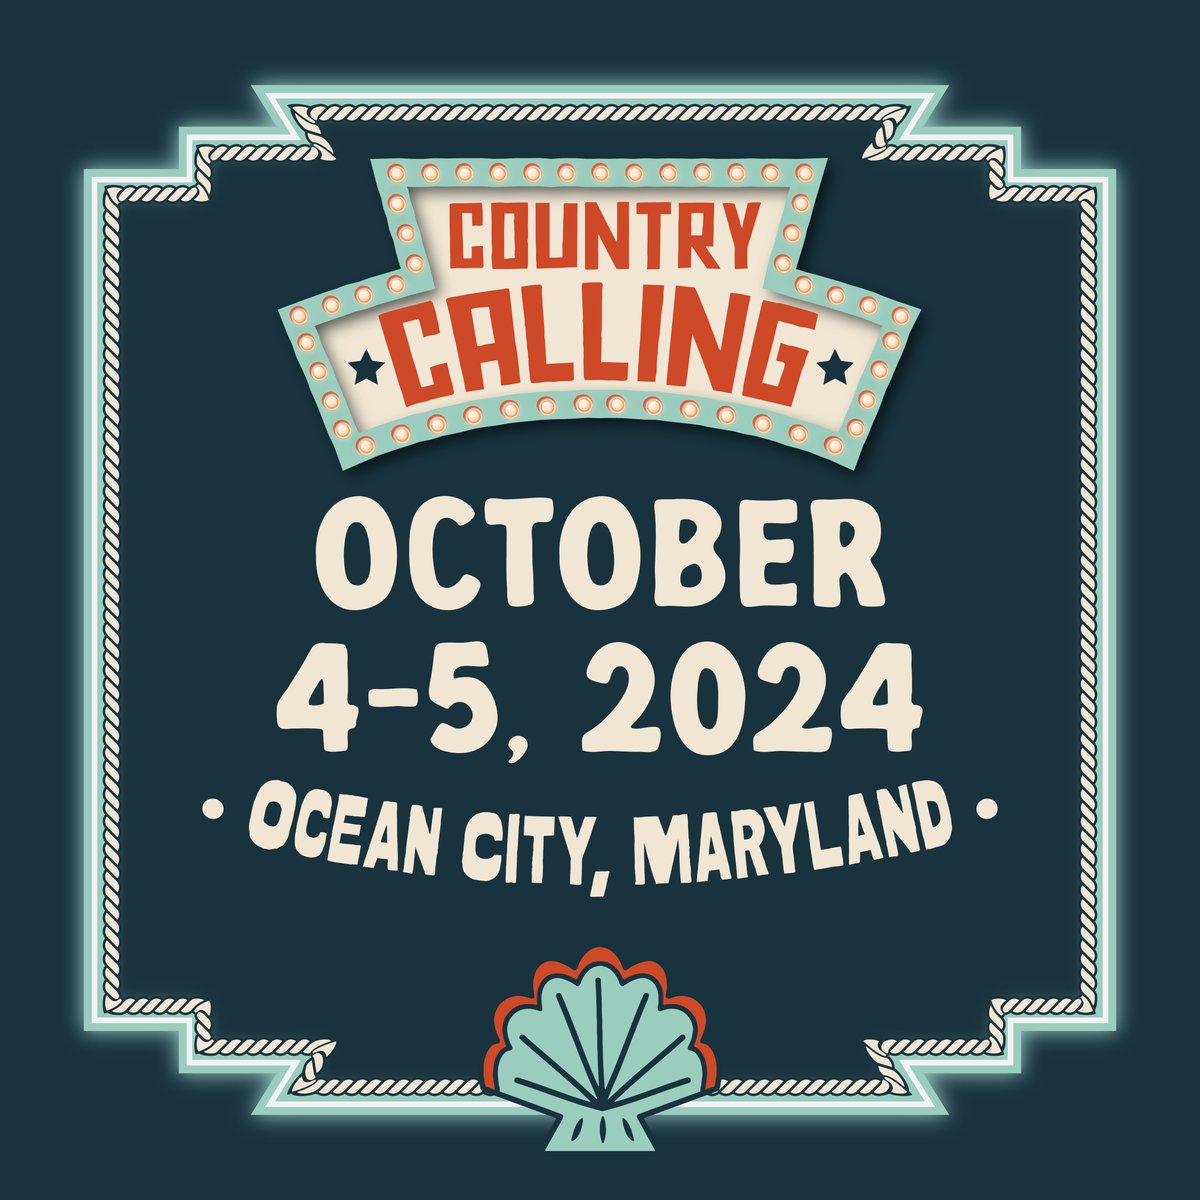 Catch the wave to Ocean City's debut Country Calling Festival 🤠🌊 Oct 4-5, where country meets coast. For lineup and tickets, sign up at countrycallingfestival.com
#ocmd #CountryCalling